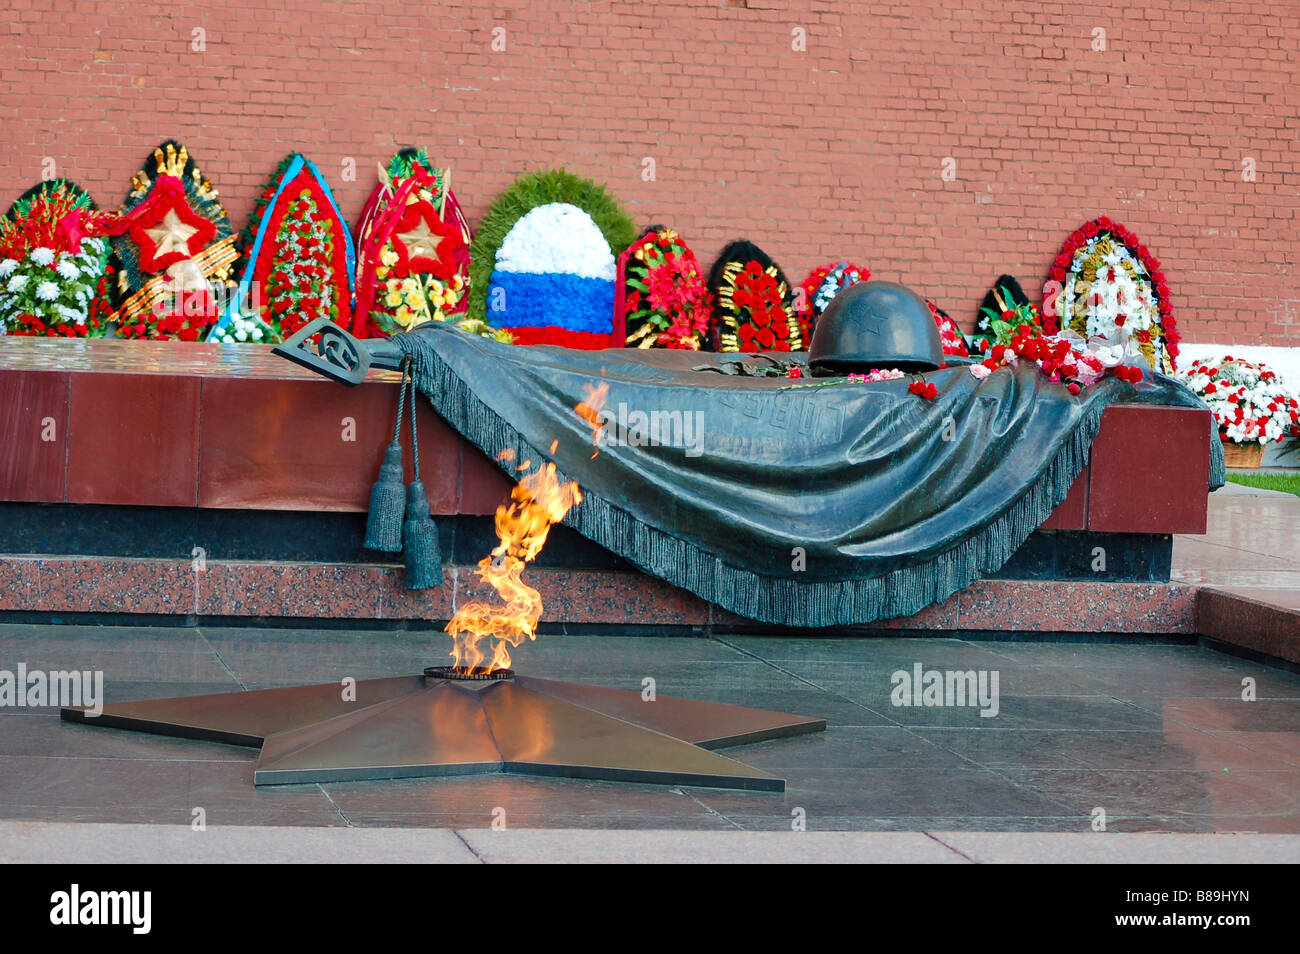 Unknown Soldiers Grave Alexander Garden Red Square Moscow Russia Stock Photo